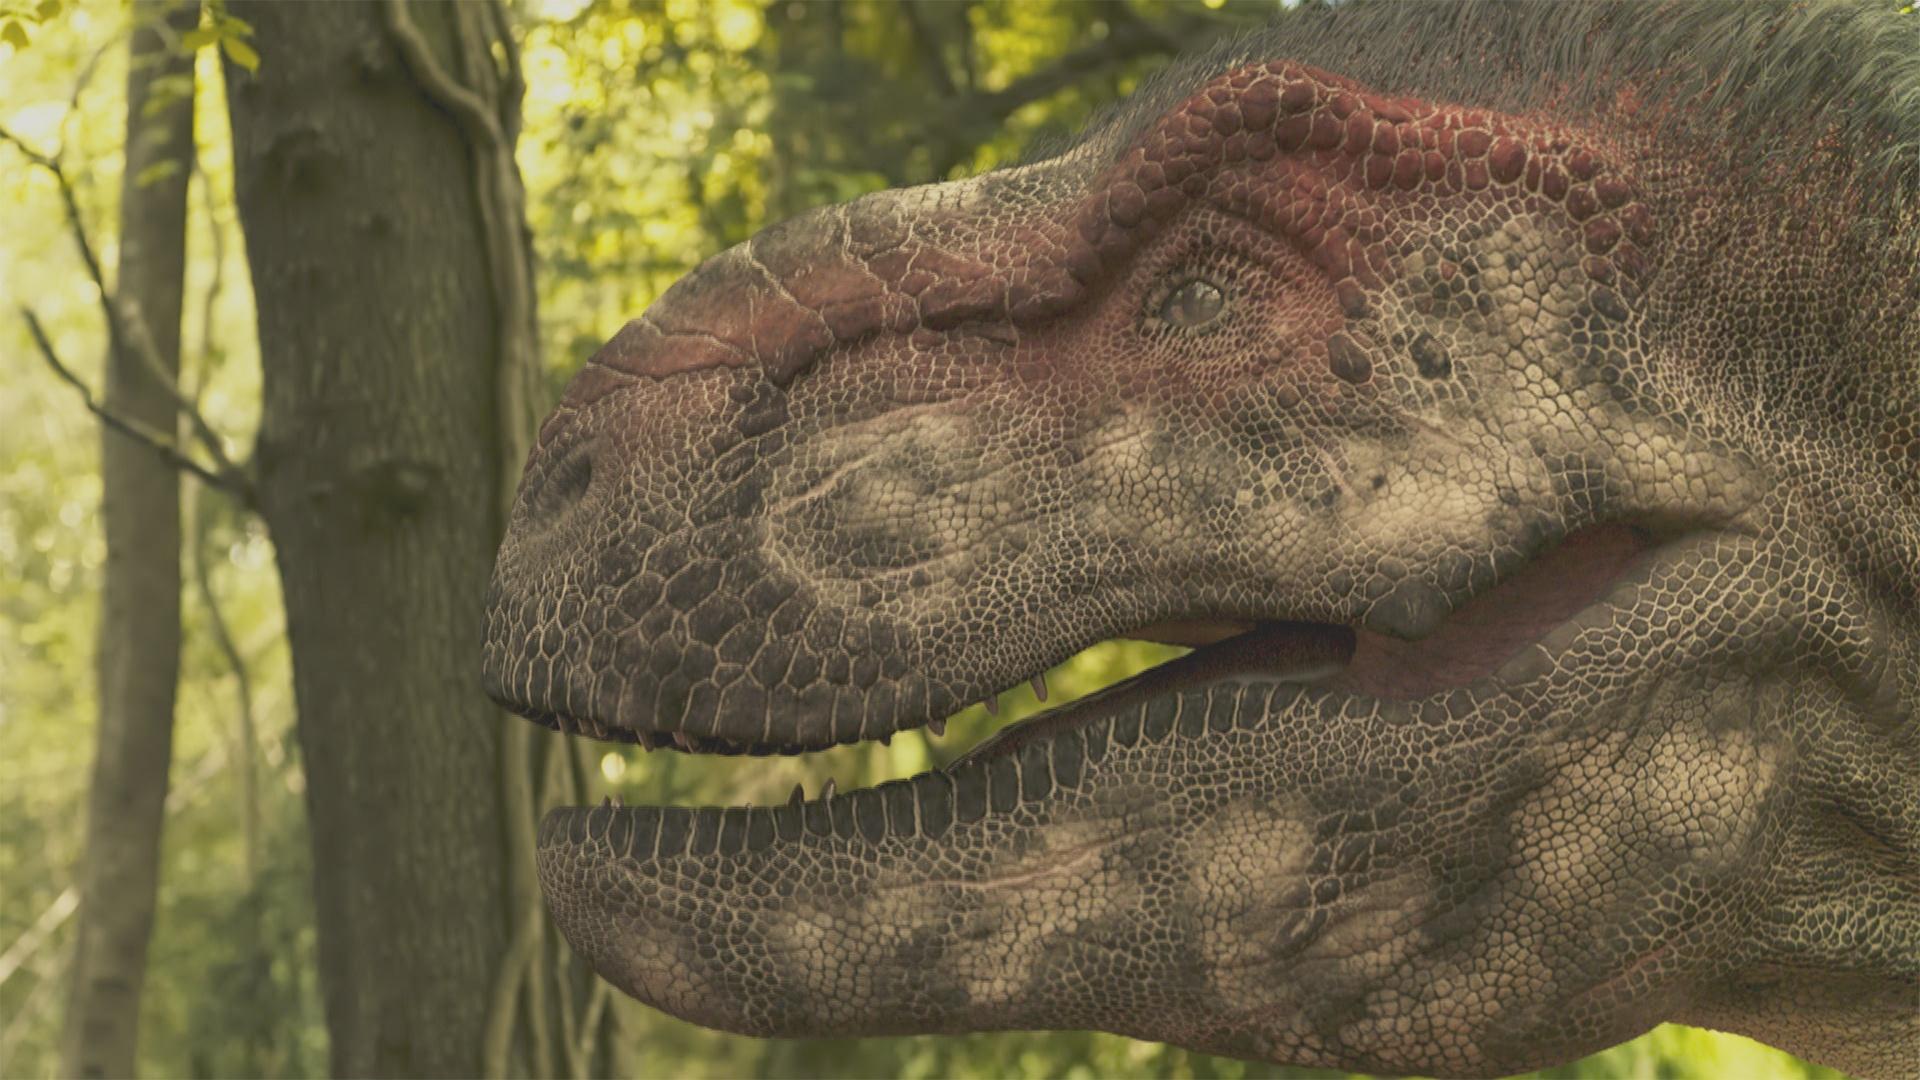 Tooth and Claw: A brief history of dinosaurs in video games